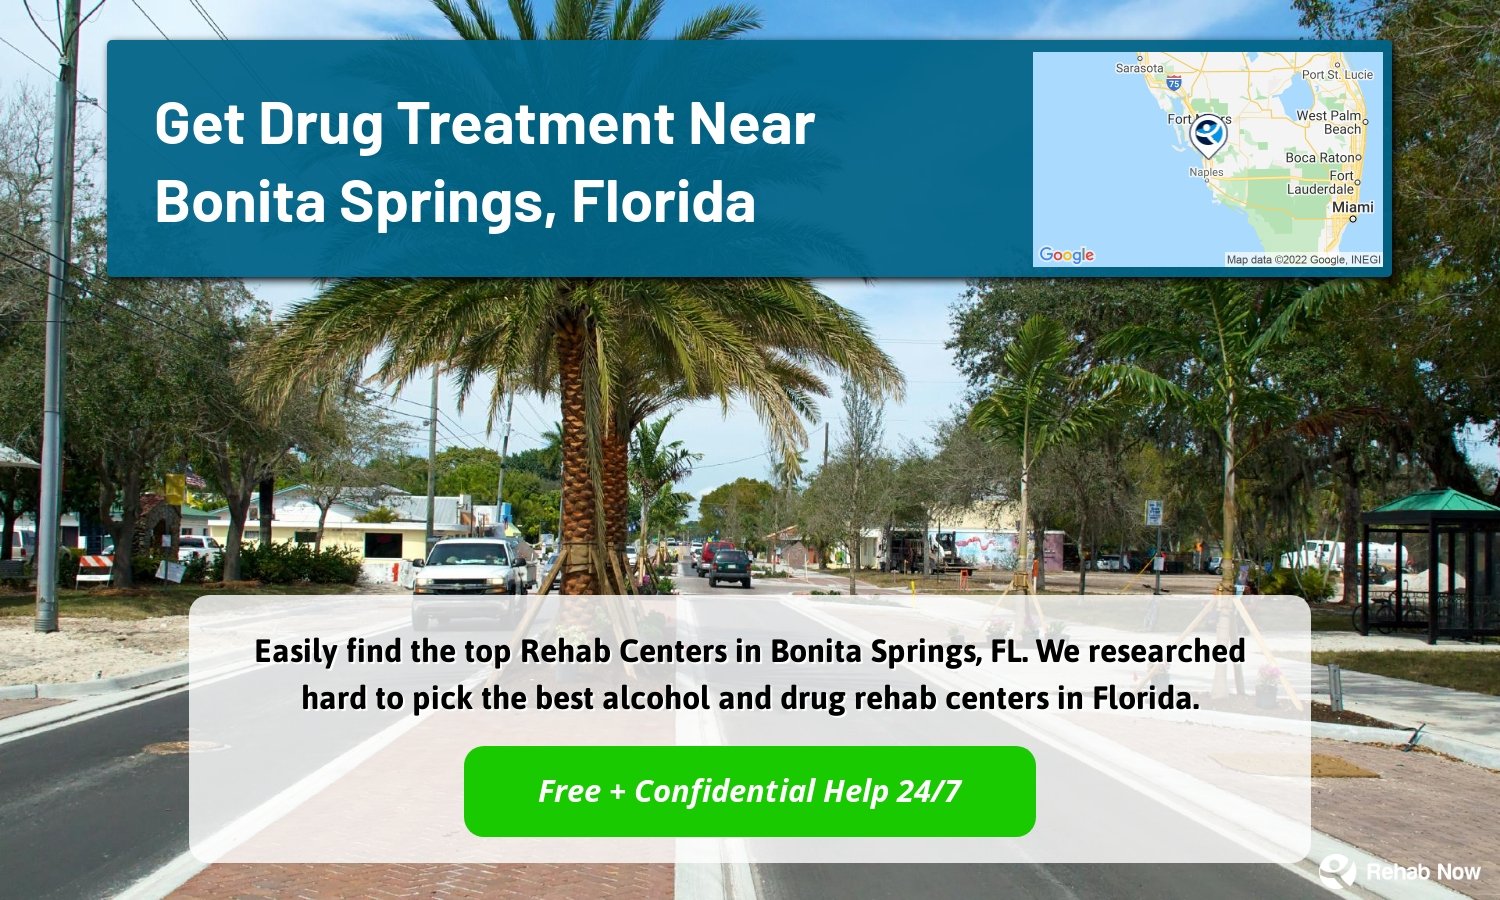 Easily find the top Rehab Centers in Bonita Springs, FL. We researched hard to pick the best alcohol and drug rehab centers in Florida.